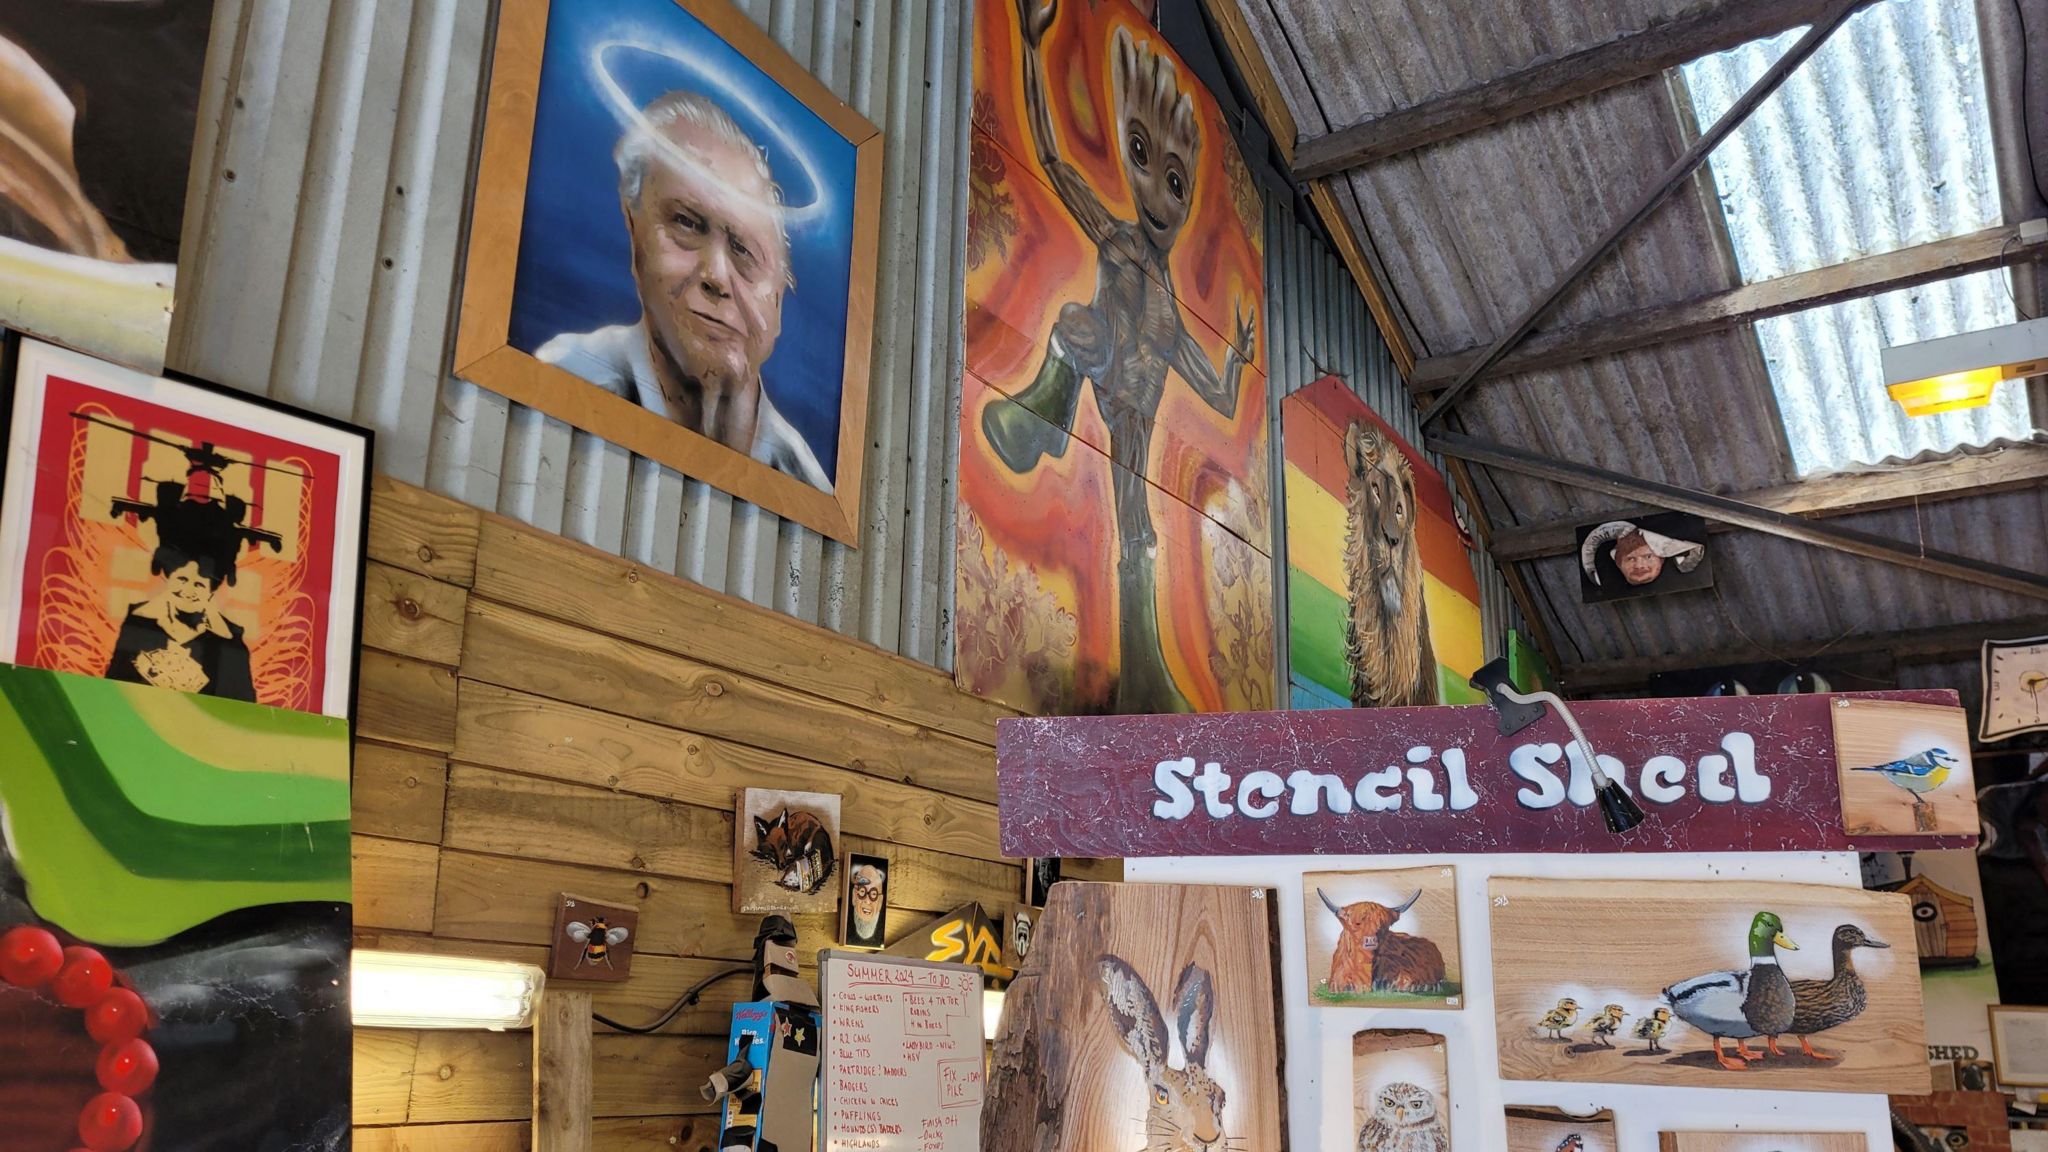 The inside of Stencil Shed with various artworks on display including one of David Attenborough with a halo above his head